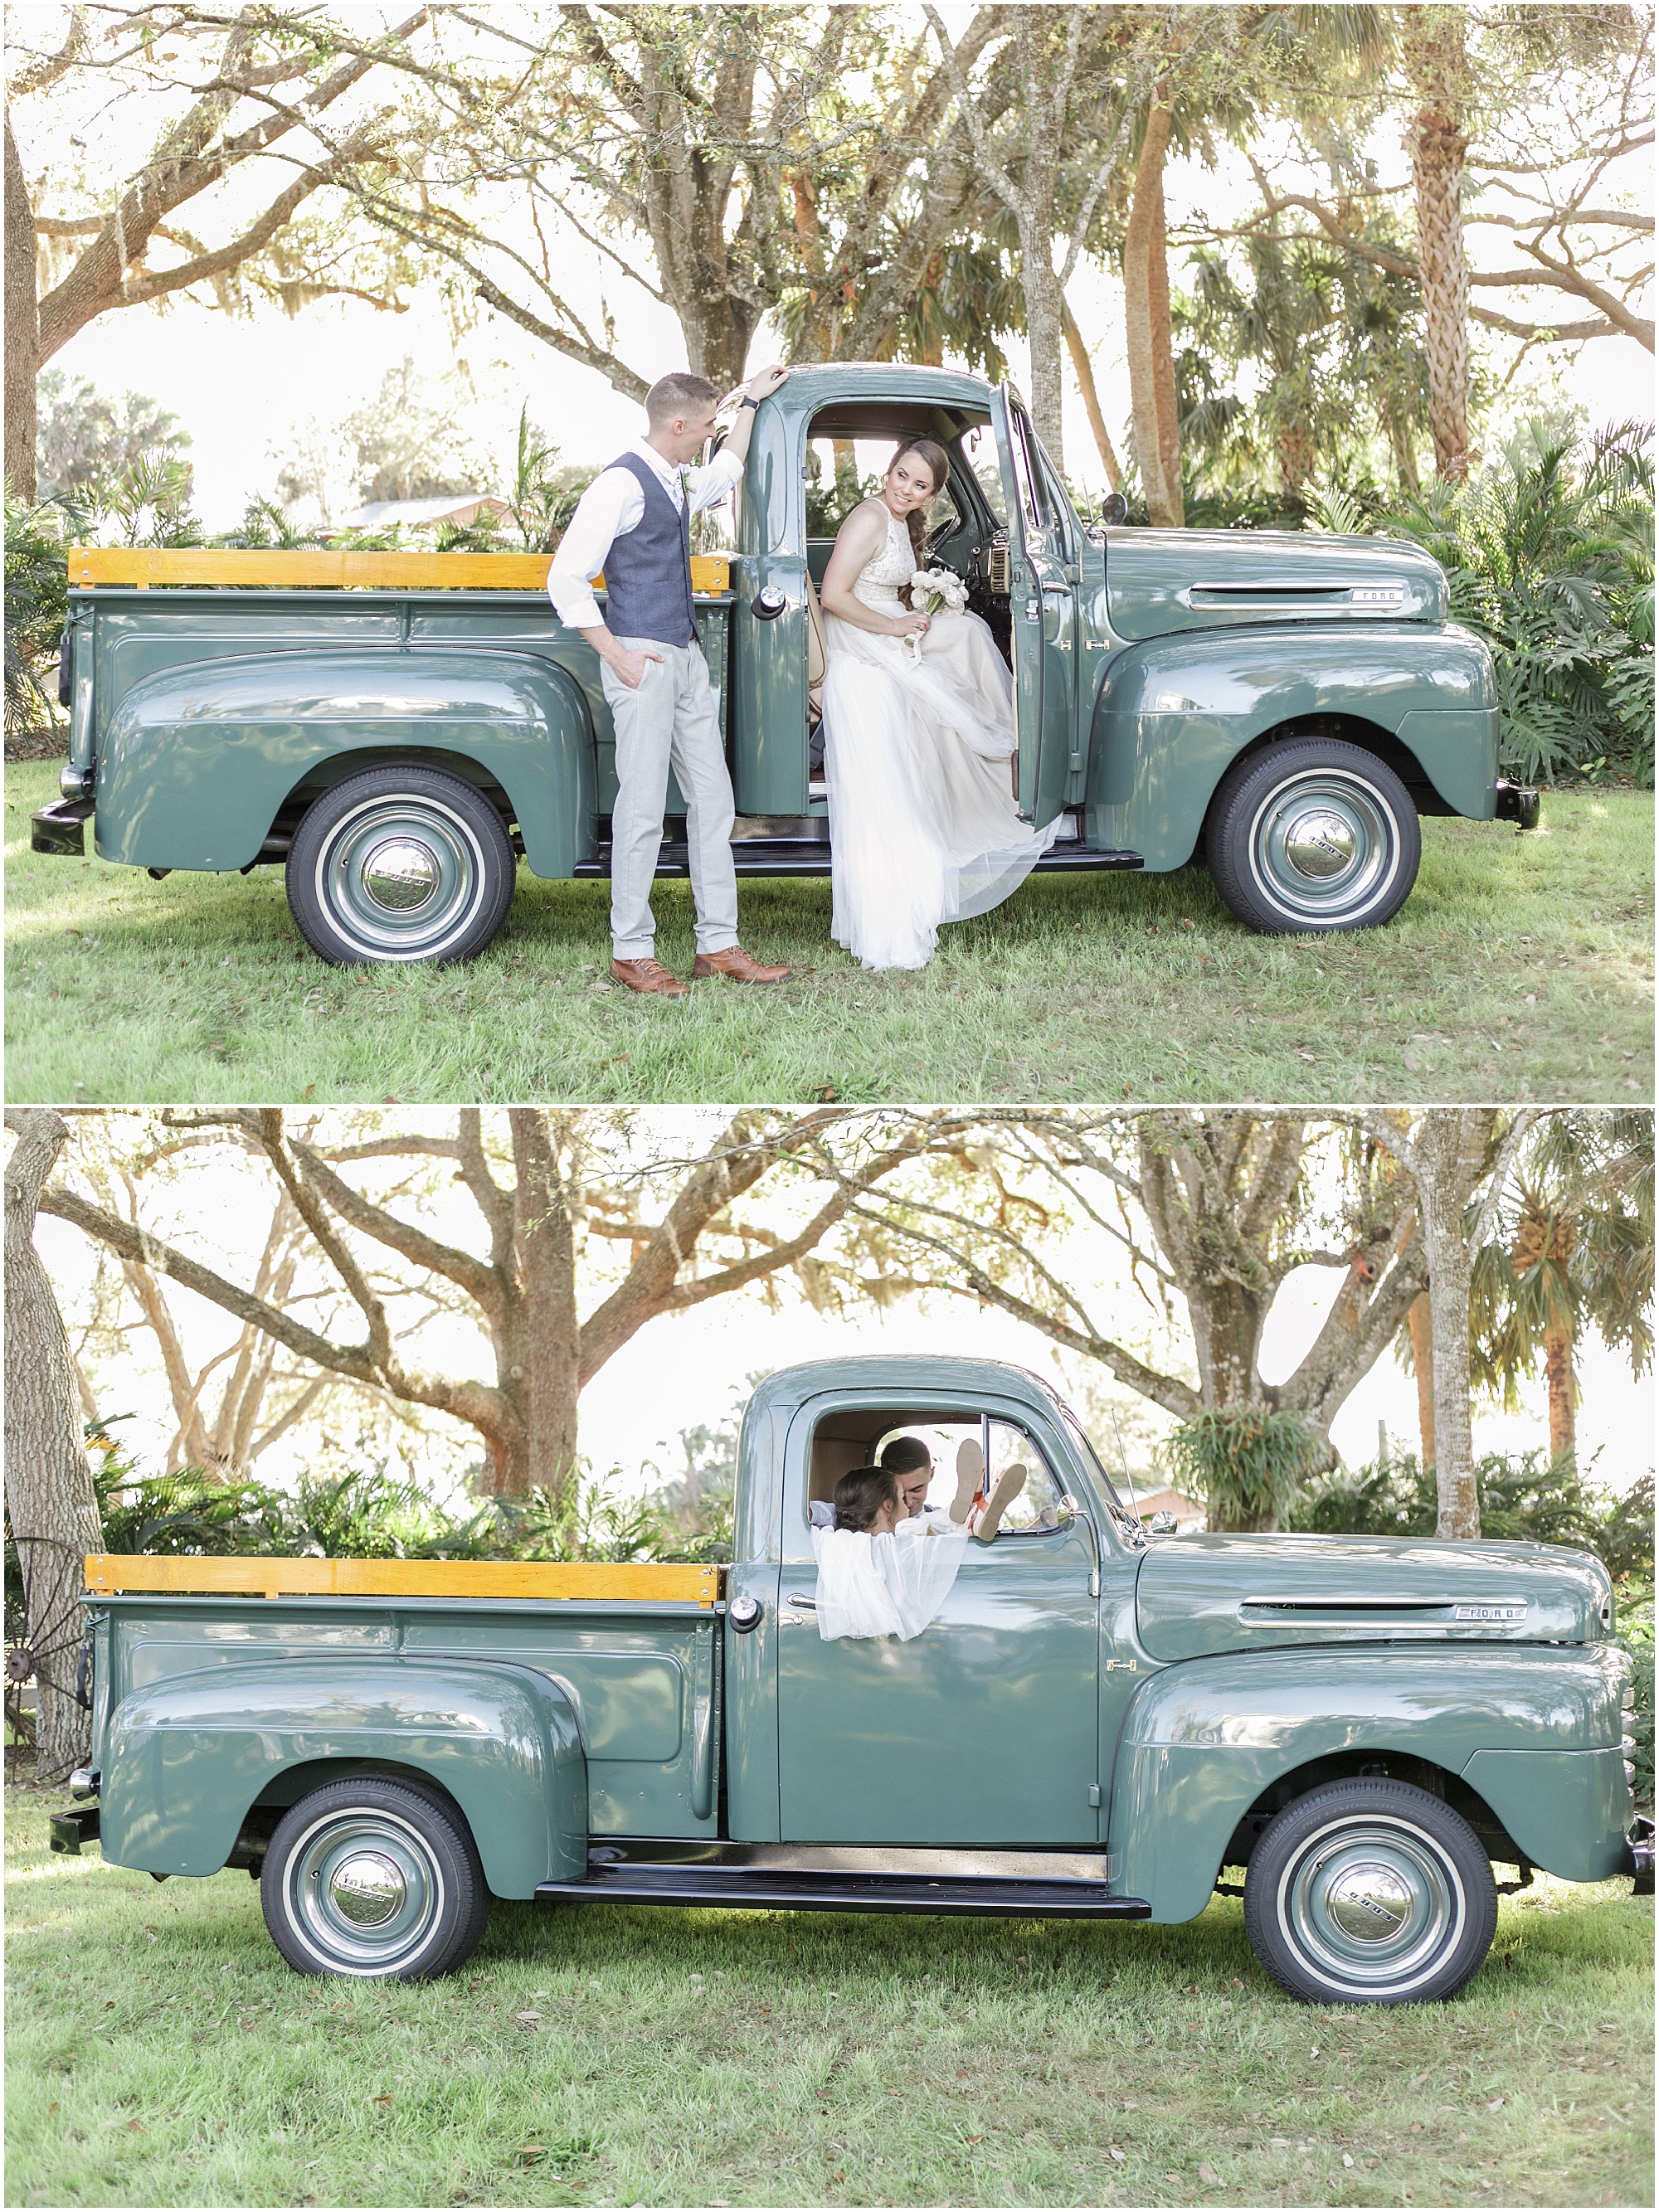 Bride and groom taking pictures next to a vintage Ford truck